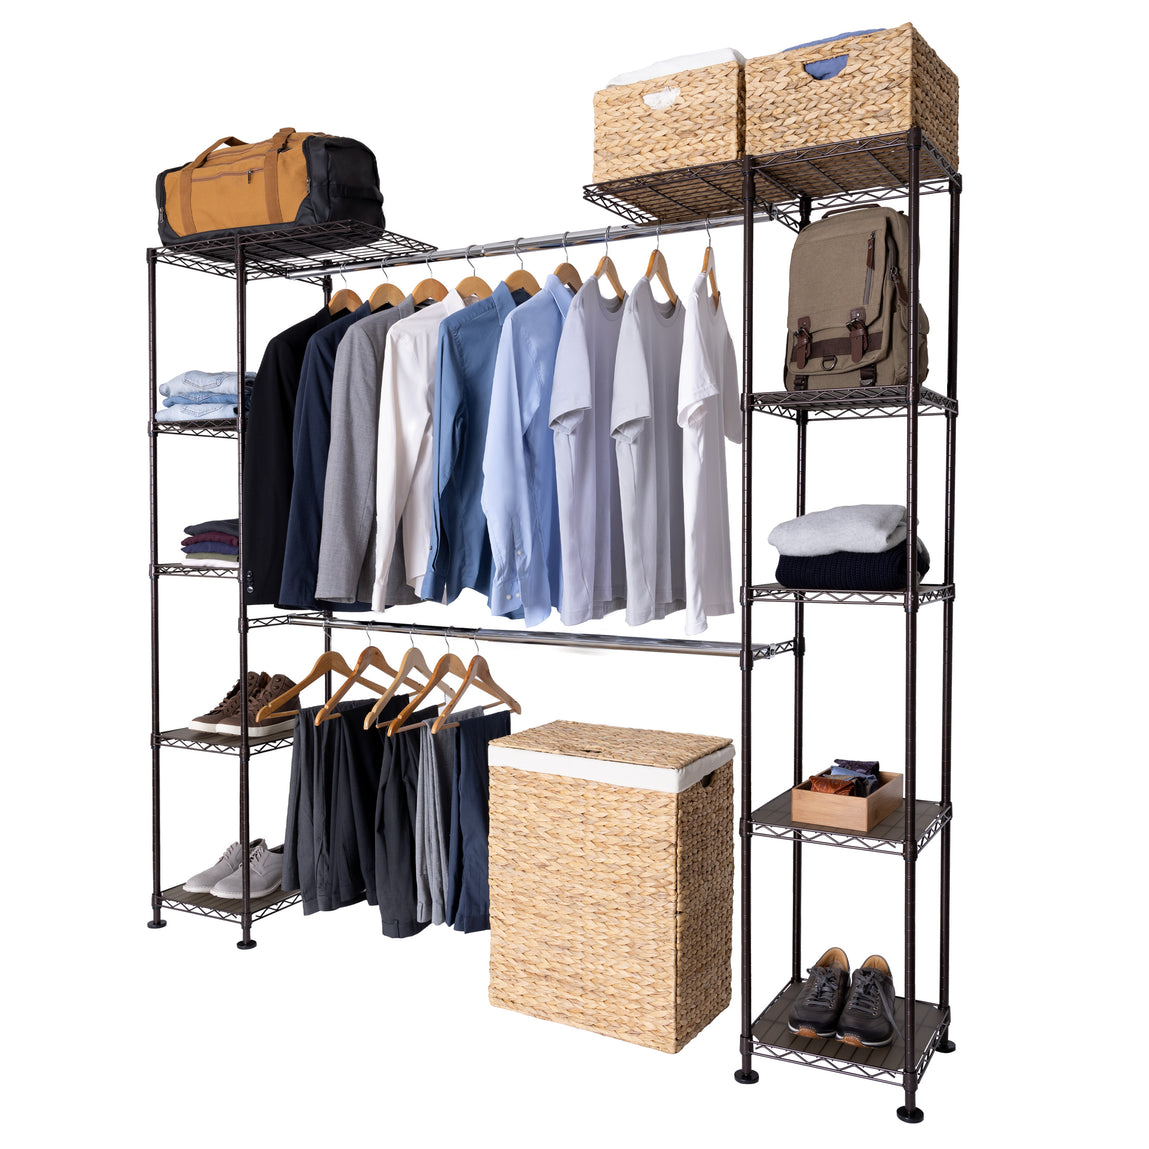 AdvantageFlex, our Line of Bedroom Closets, Organizers and Accessories